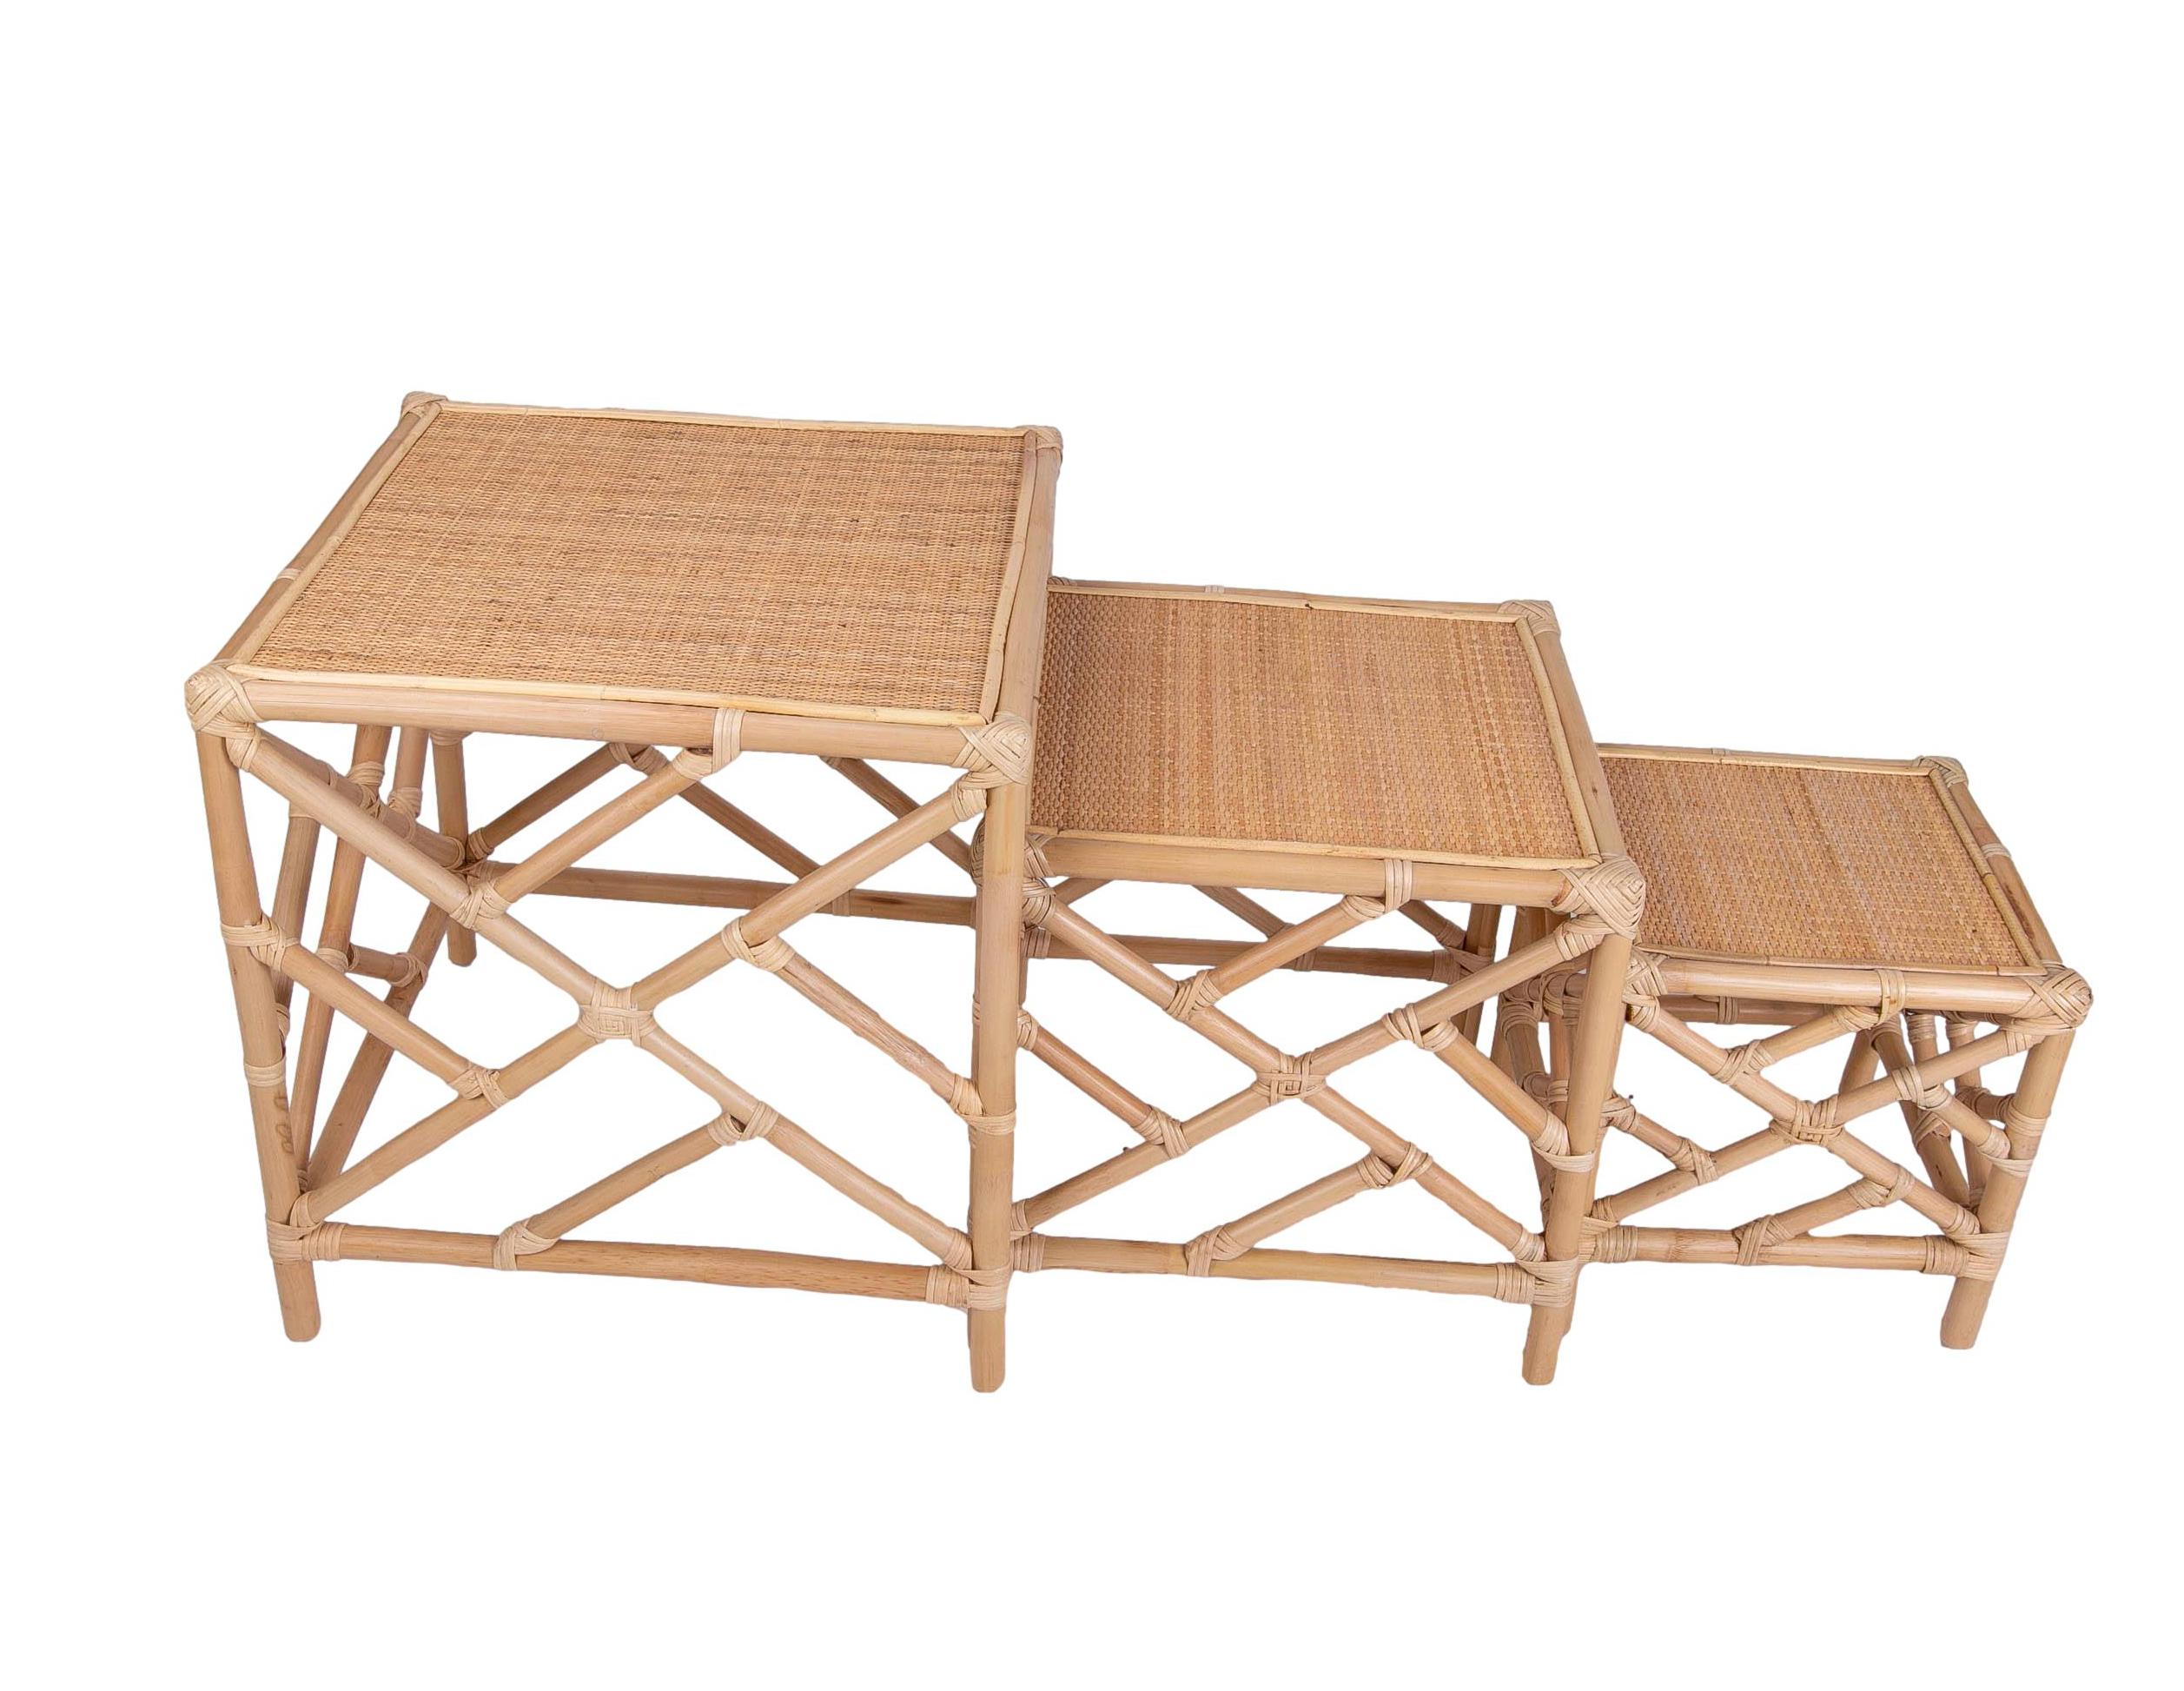 Bamboo and wicker Nesting Table Consisting of Three Tables in Different Sizes For Sale 8